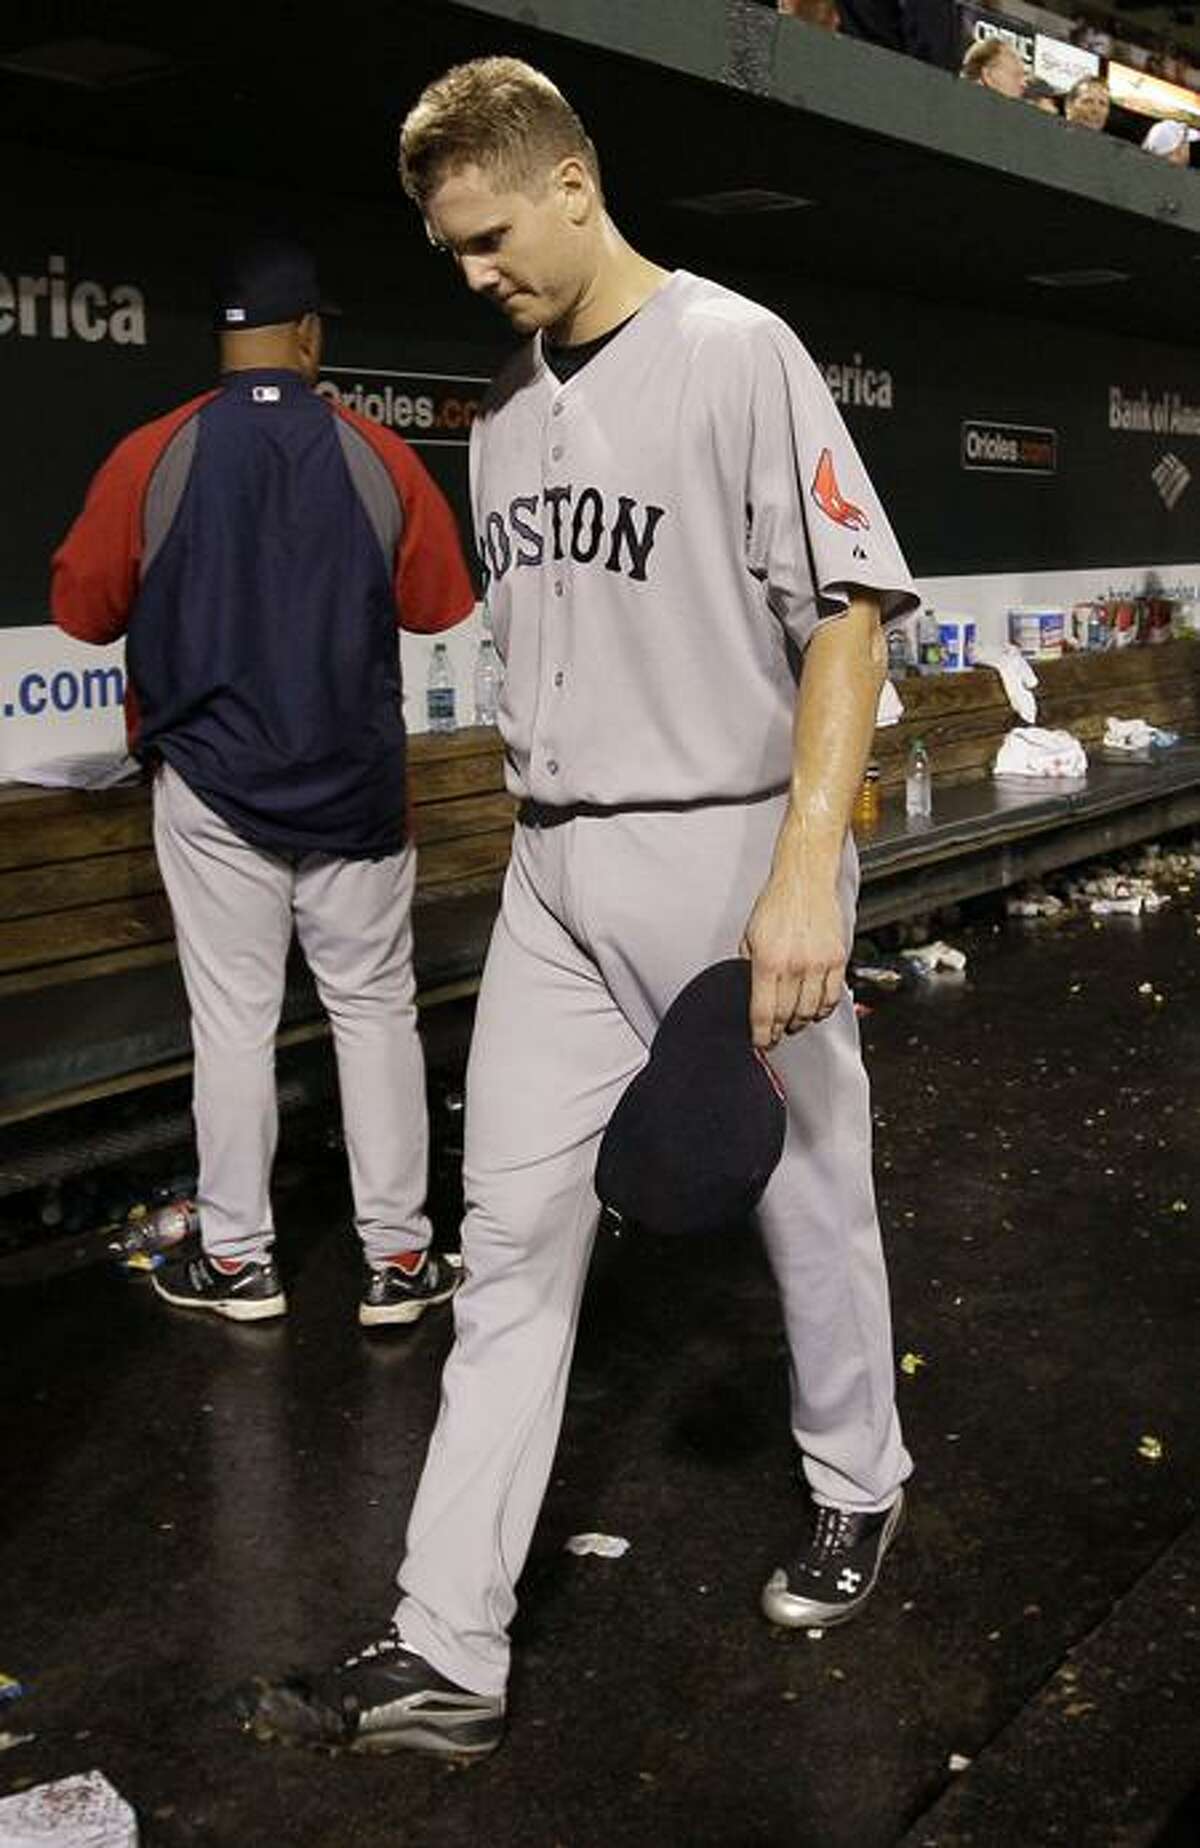 Boston Red Sox relief pitcher Jonathan Papelbon walks out of the dugout after the Red Sox's 4-3 to the Baltimore Orioles in a baseball game Wednesday, Sept. 28, 2011, in Baltimore. (AP Photo/Patrick Semansky)